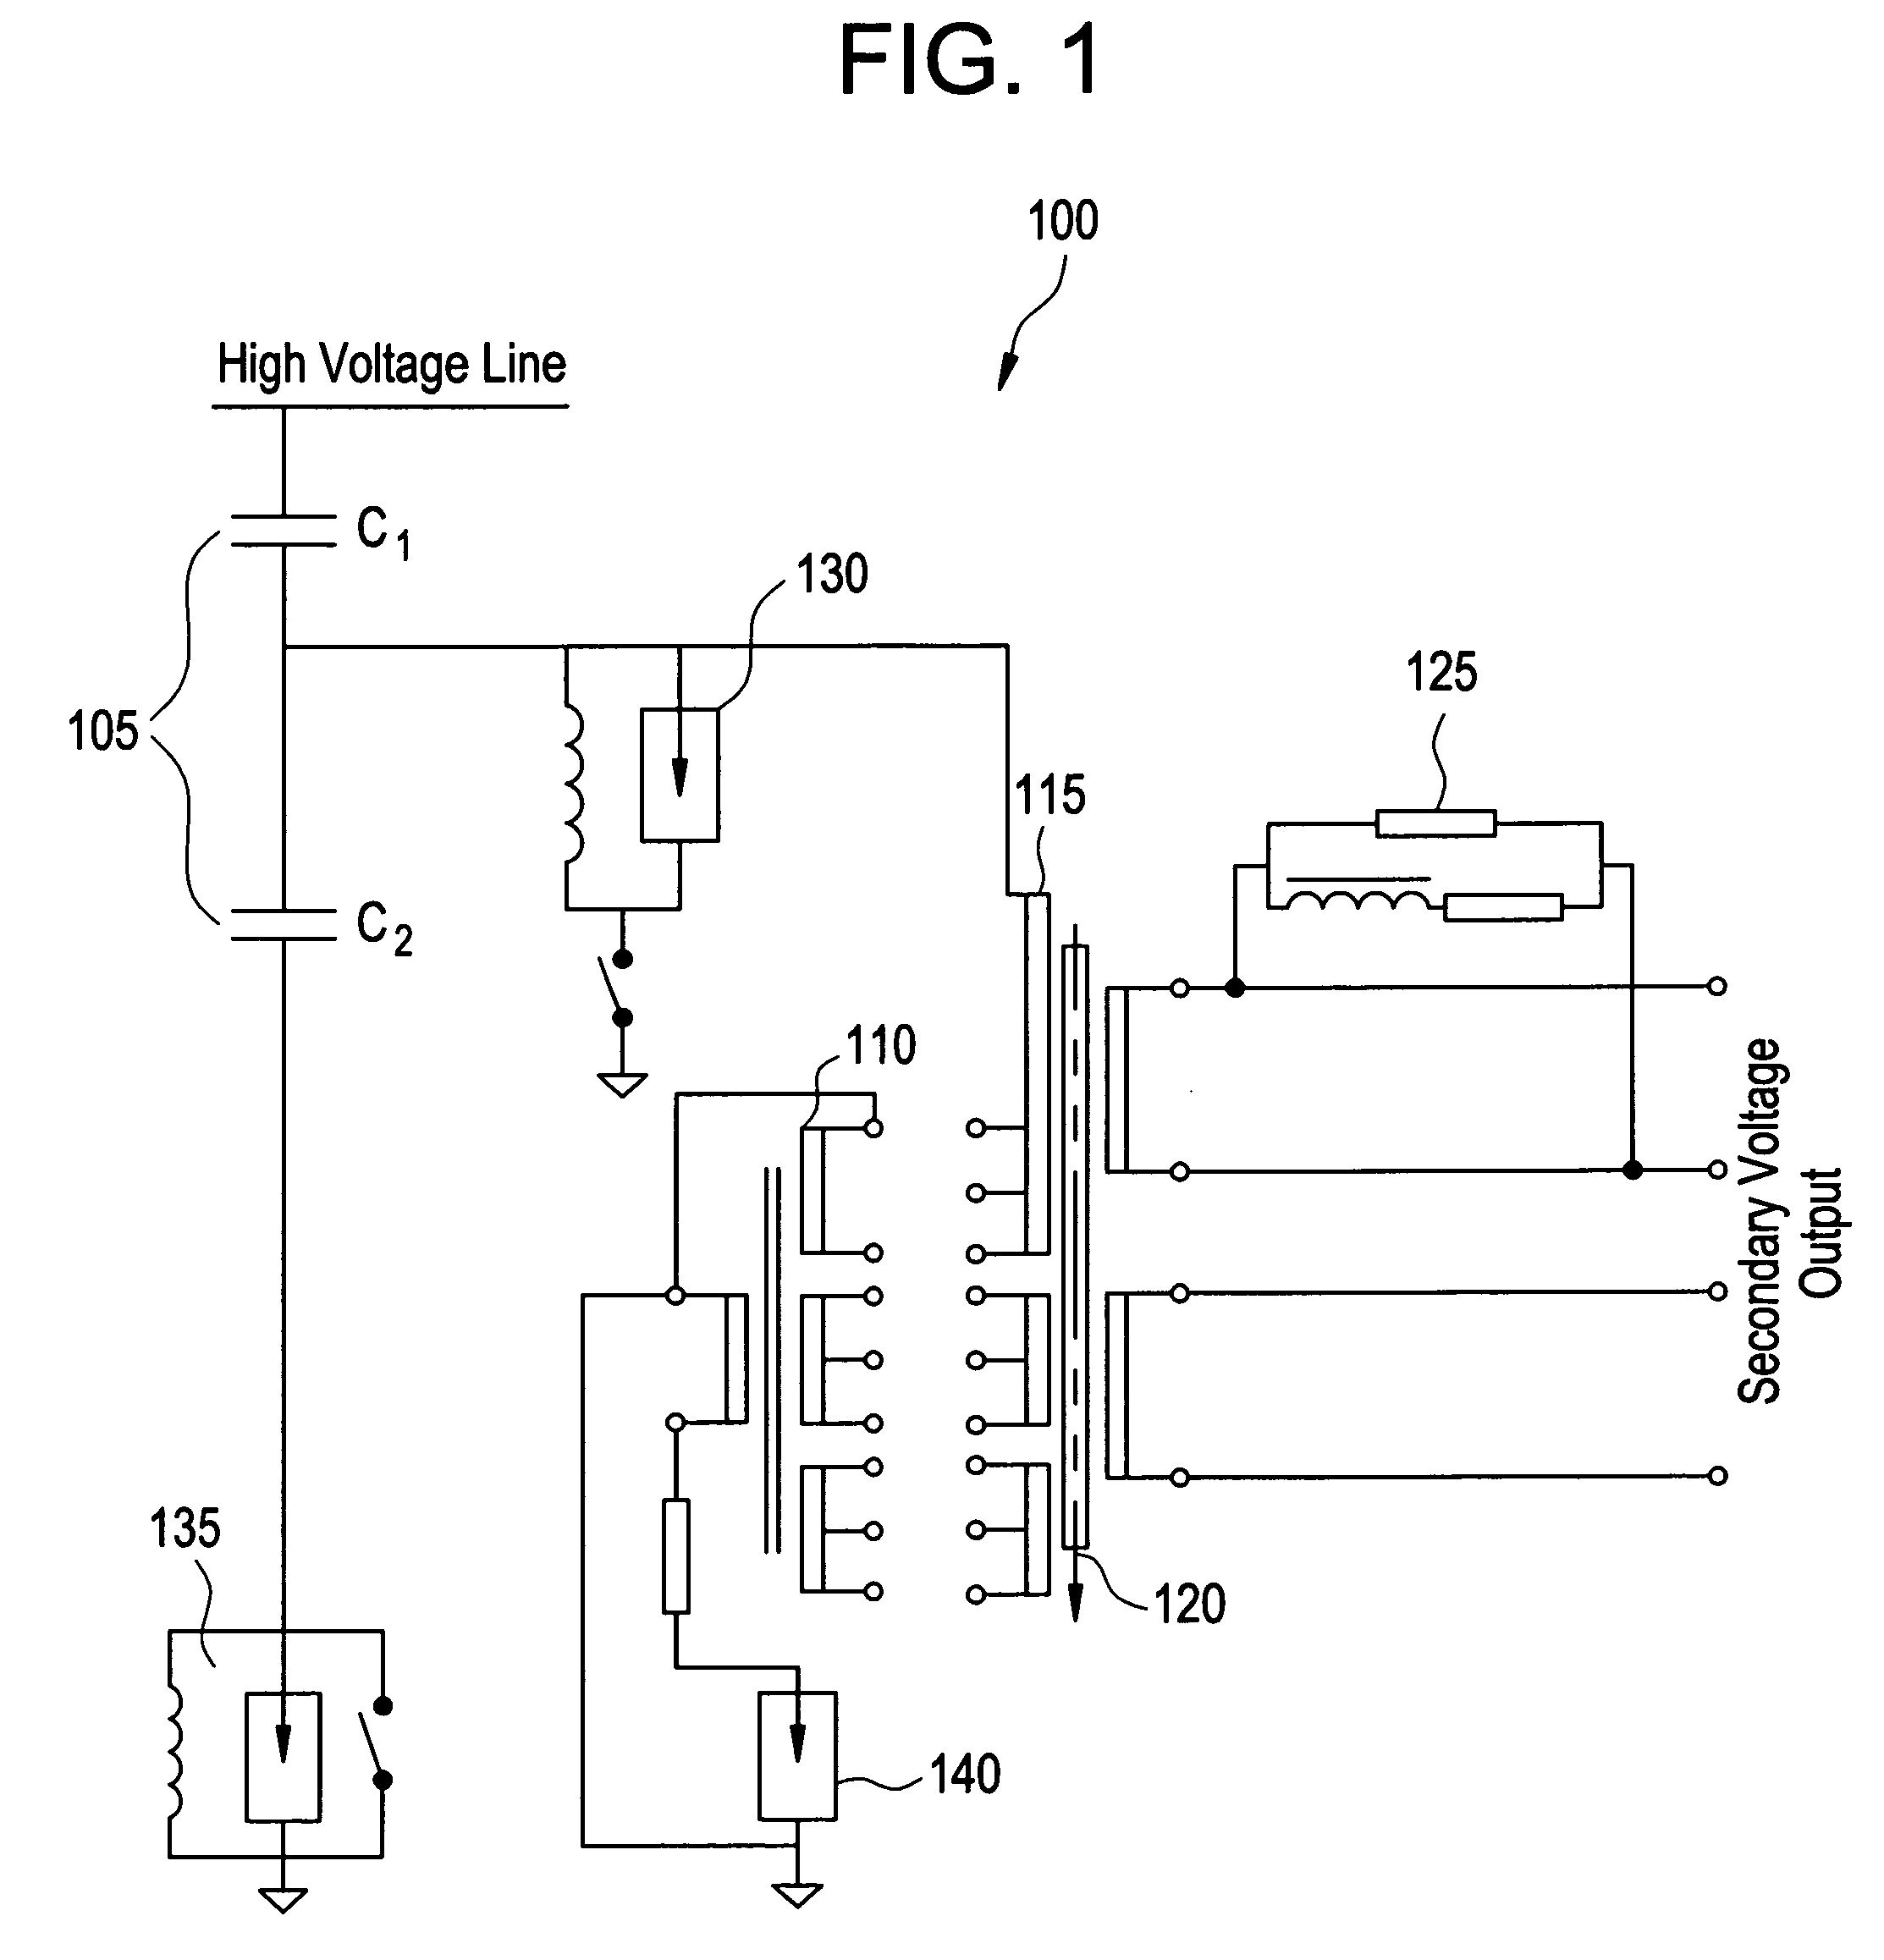 Self-adjusting voltage filtering technique compensating for dynamic errors of capacitive voltage transformers